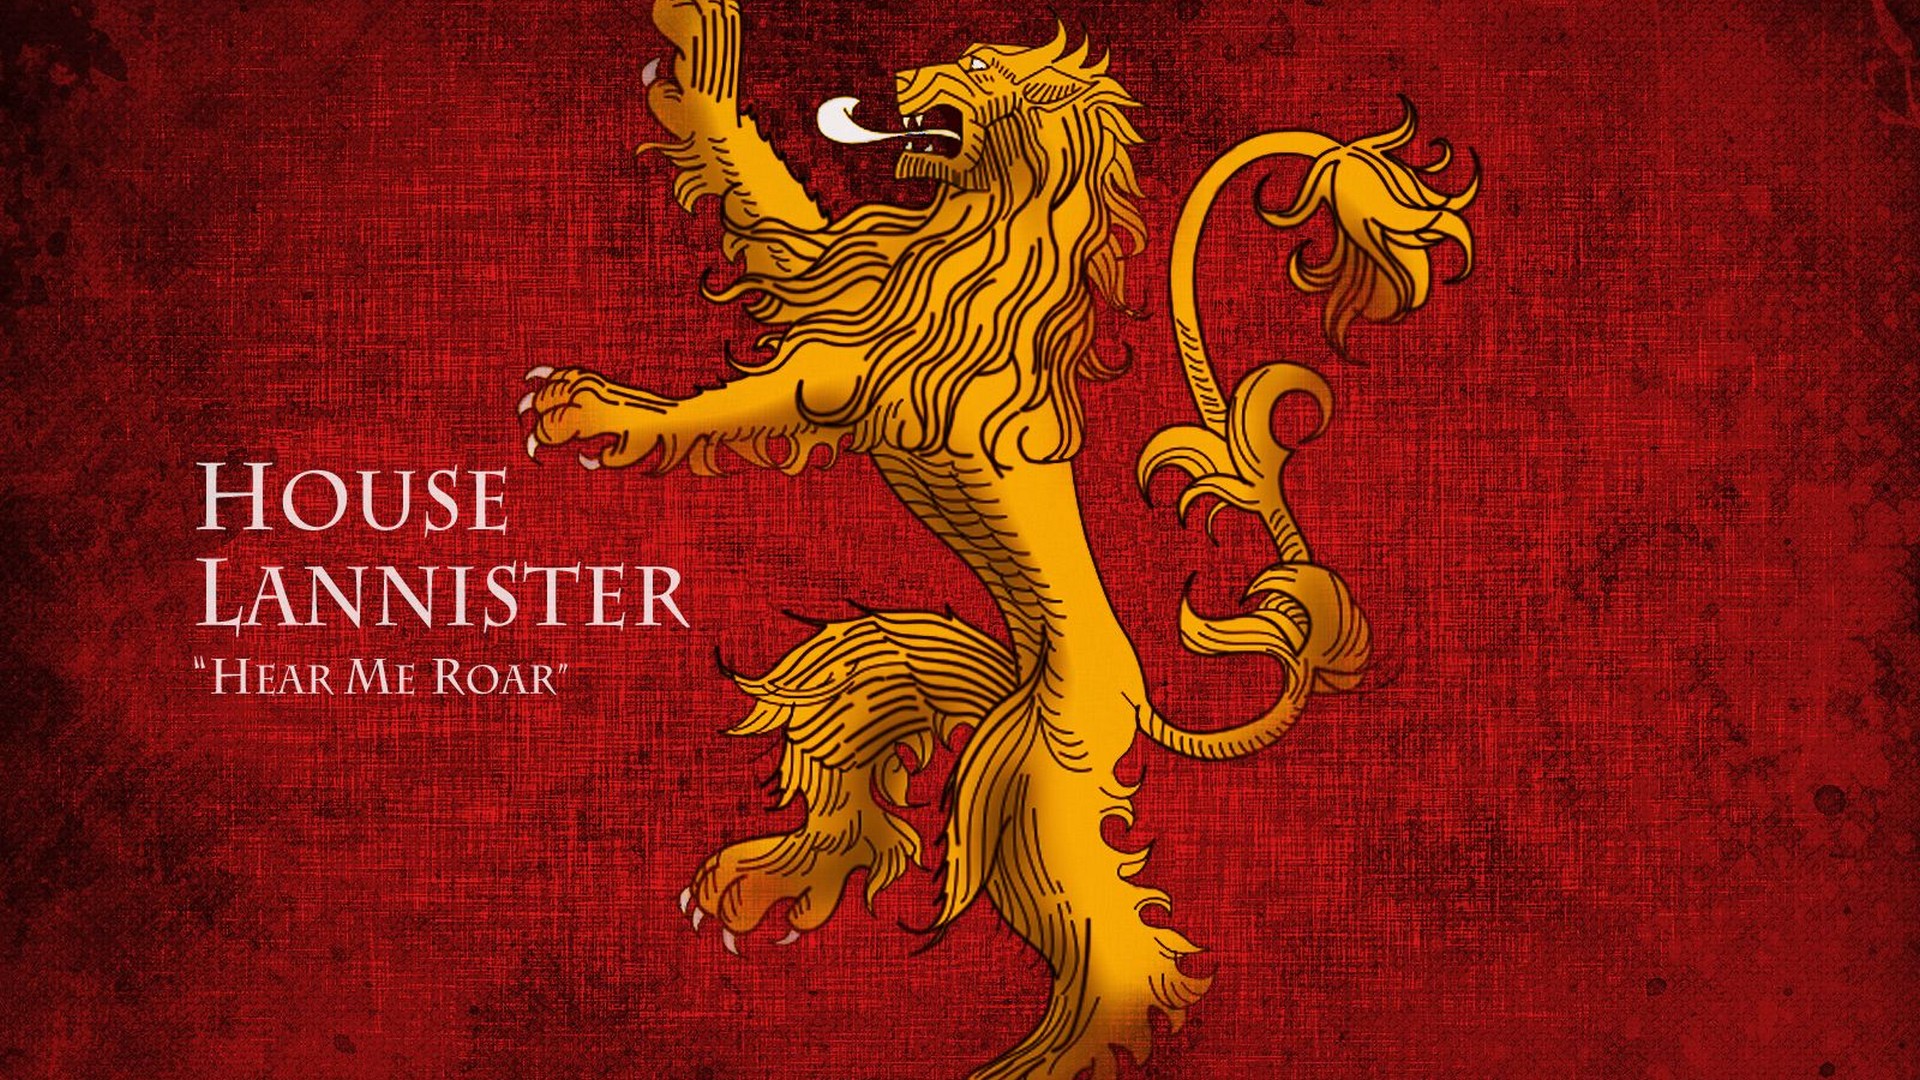 House Lannister Game of Thrones Poster Wallpaper with high-resolution 1920x1080 pixel. You can use this poster wallpaper for your Desktop Computers, Mac Screensavers, Windows Backgrounds, iPhone Wallpapers, Tablet or Android Lock screen and another Mobile device